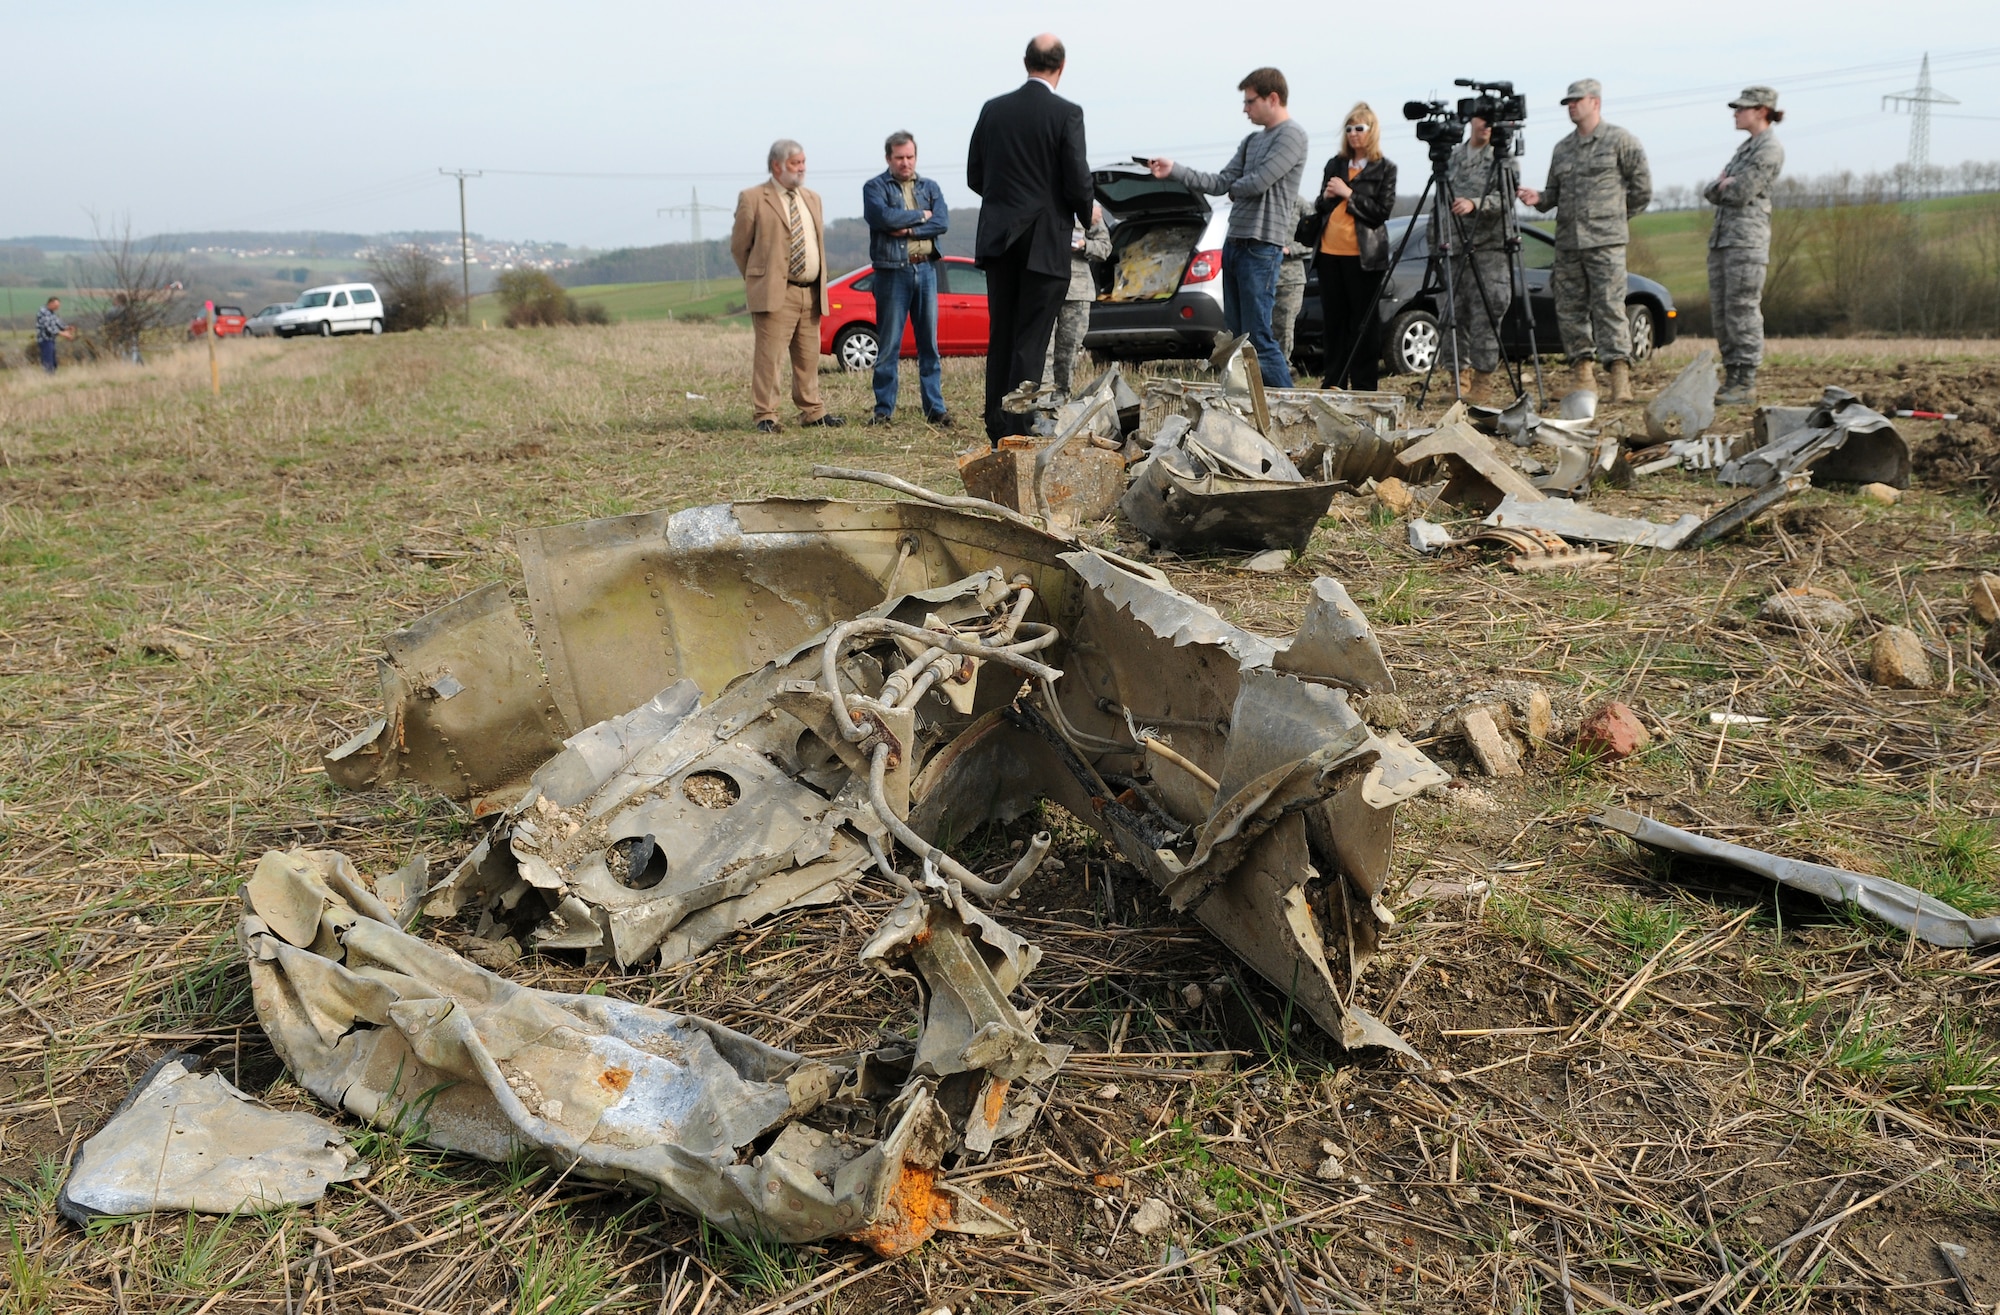 BITBURG, Germany – Rudolph Rinnen, public relations specialist for Volksbank Bitburg, answers questions about the wreckage of a P-47D Thunderbolt during a press event March 24. The wreckage was discovered Feb. 24 after being buried for 65 years. German and American reports detail that on Feb. 14, 1945, an American P-47D was shot down in the area. (U.S. Air Force photo/Senior Airman Nathanael Callon)